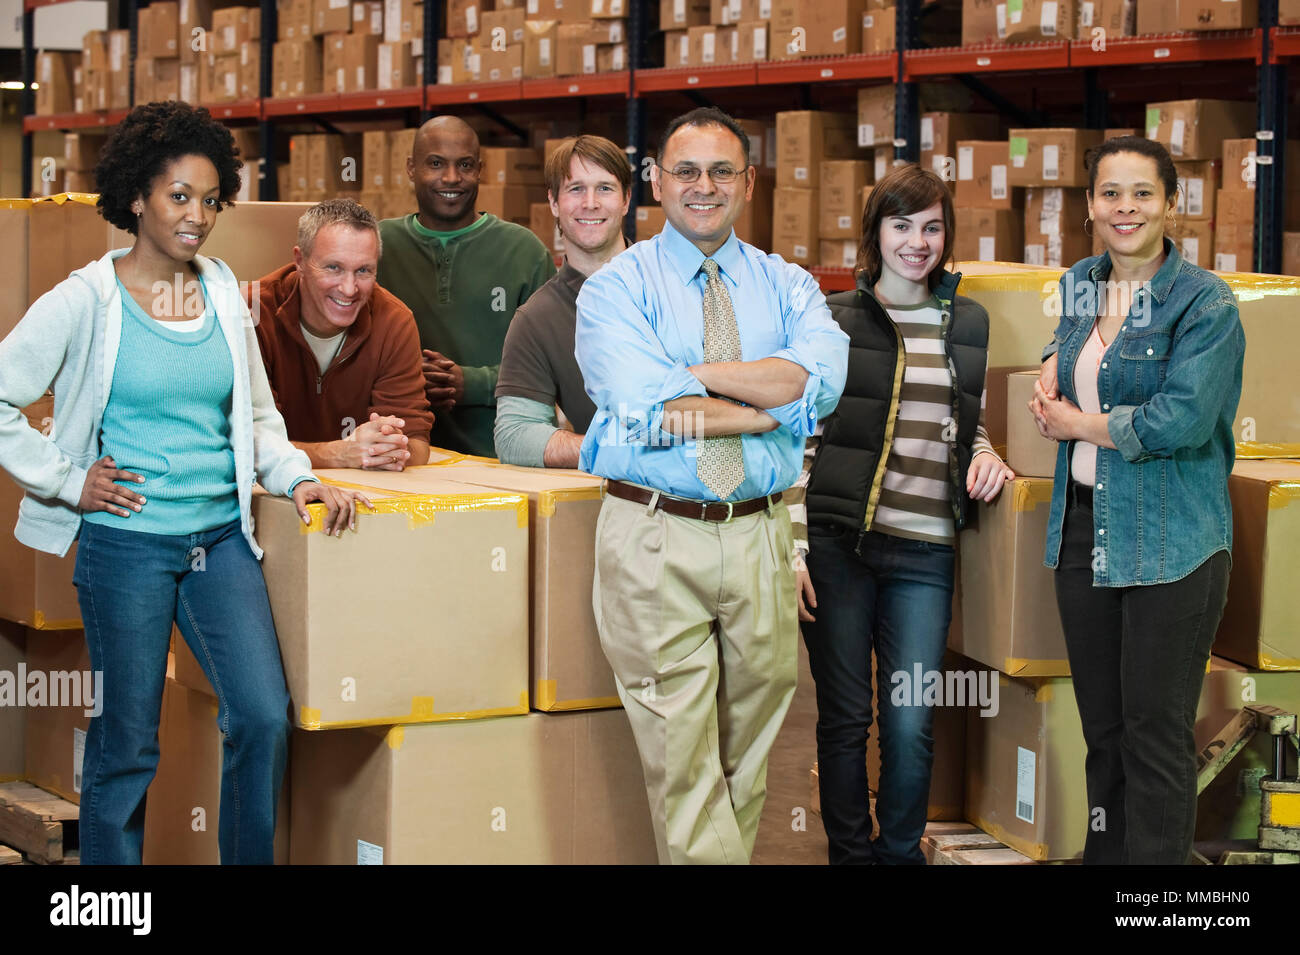 Team portrait of multi-ethnic  warehouse workers lead by a Hispanic American male executive and surrounded by large racks of products stored in cardbo Stock Photo